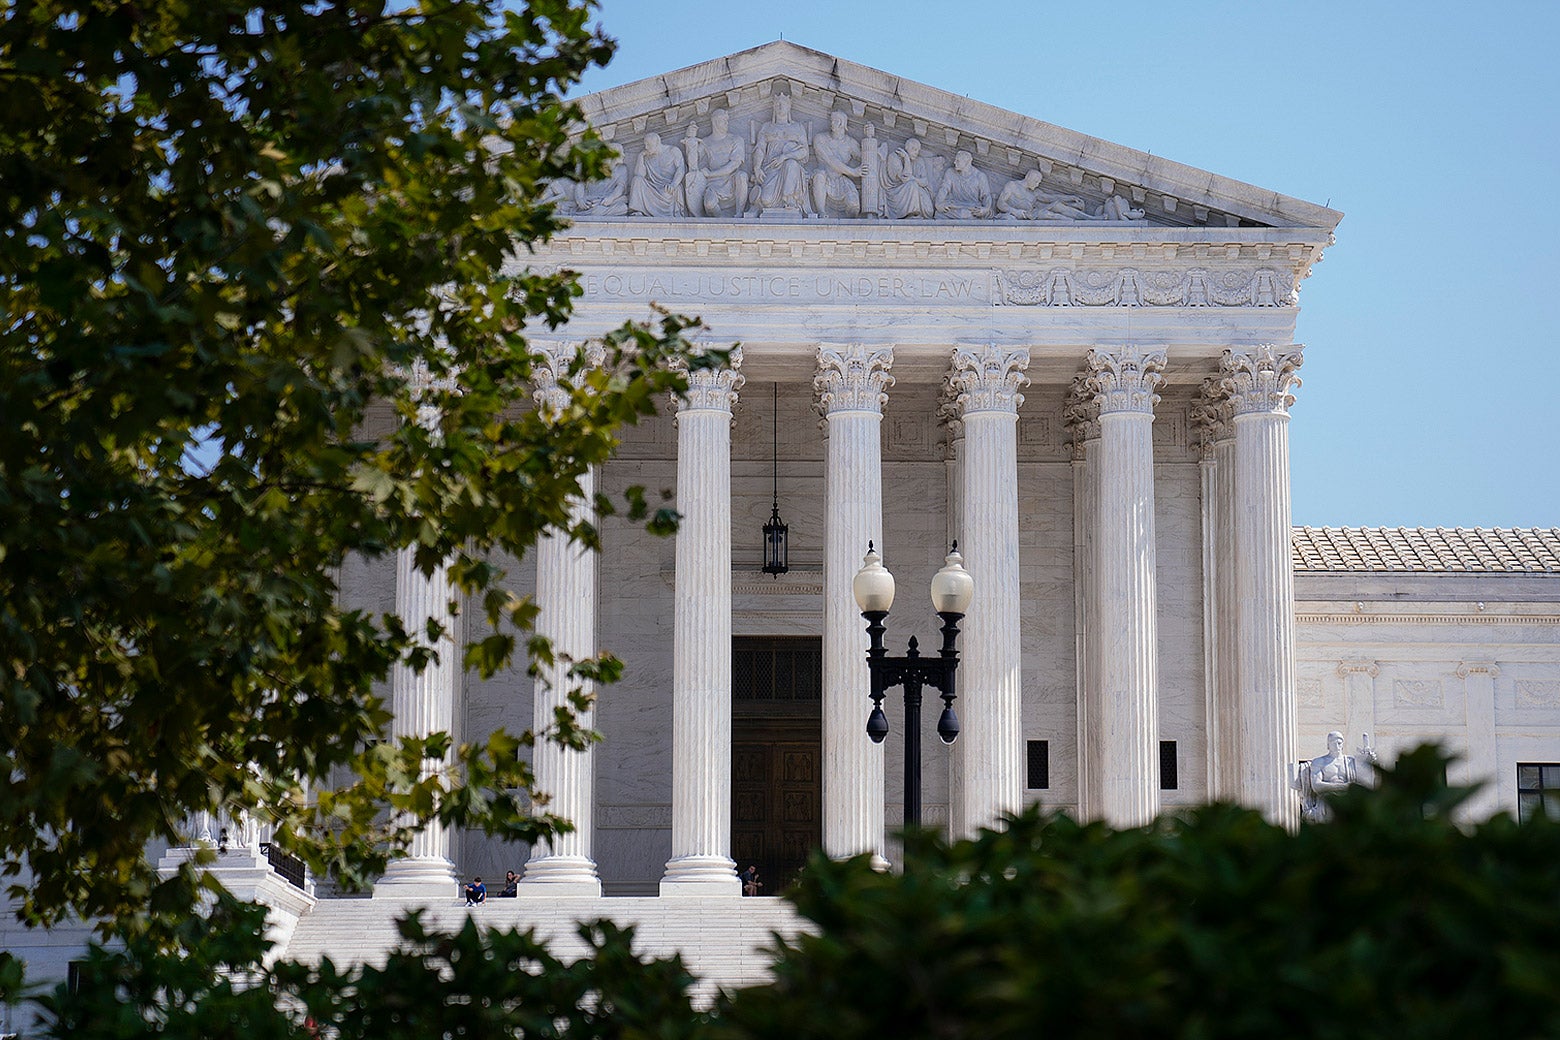 The exterior of the Supreme Court as seen through foliage.